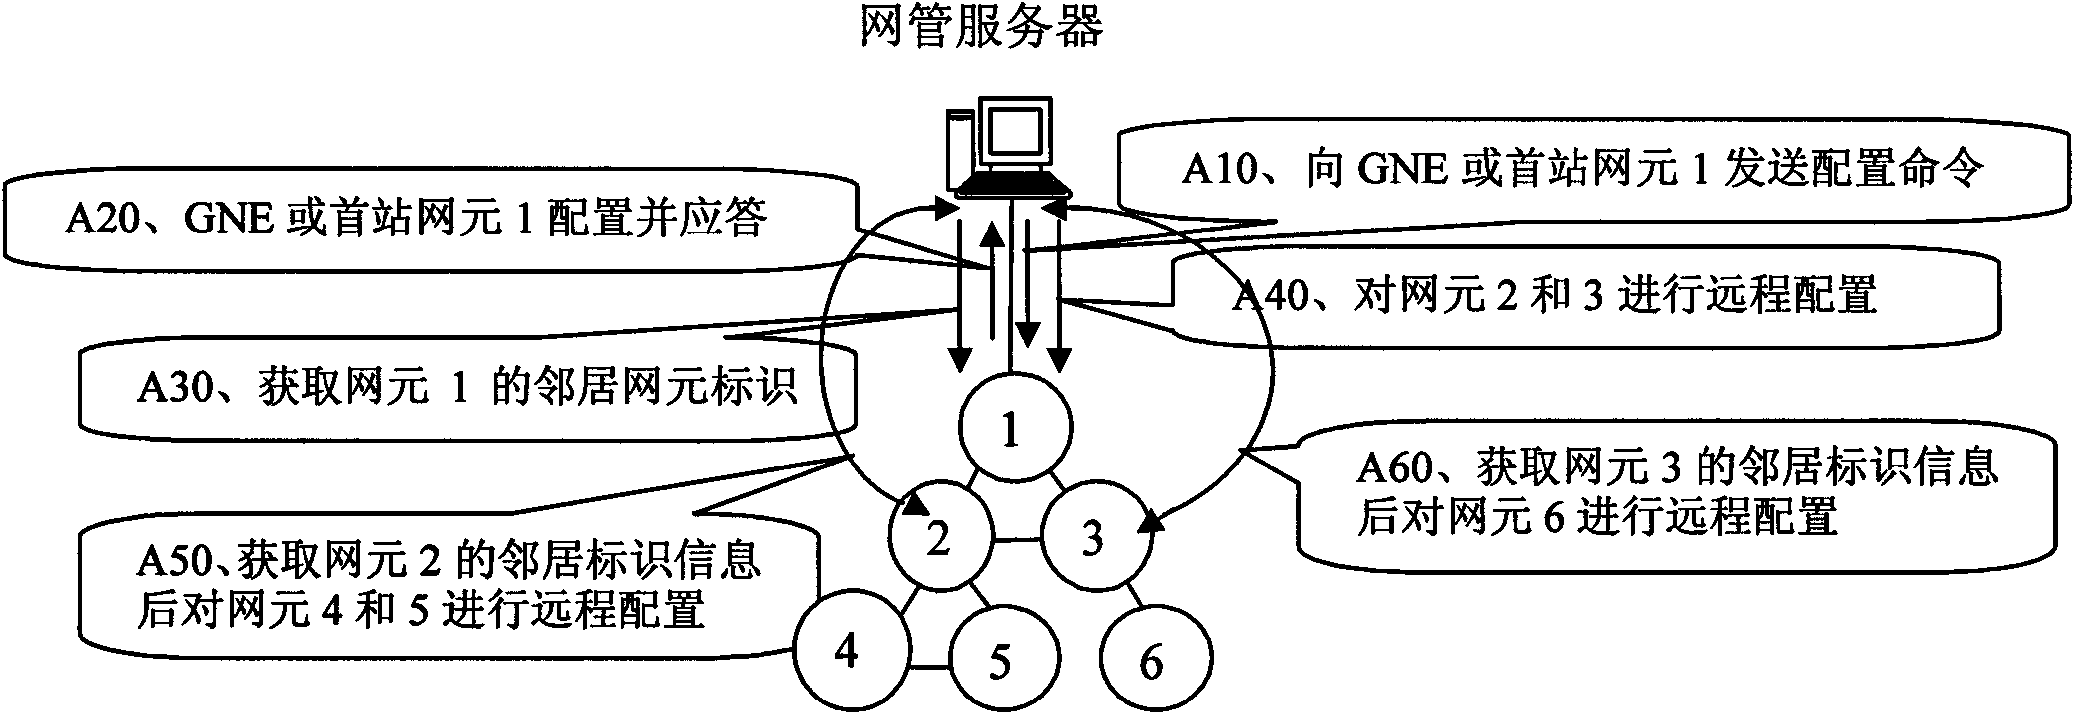 Method for remotely configuring network element through network management server